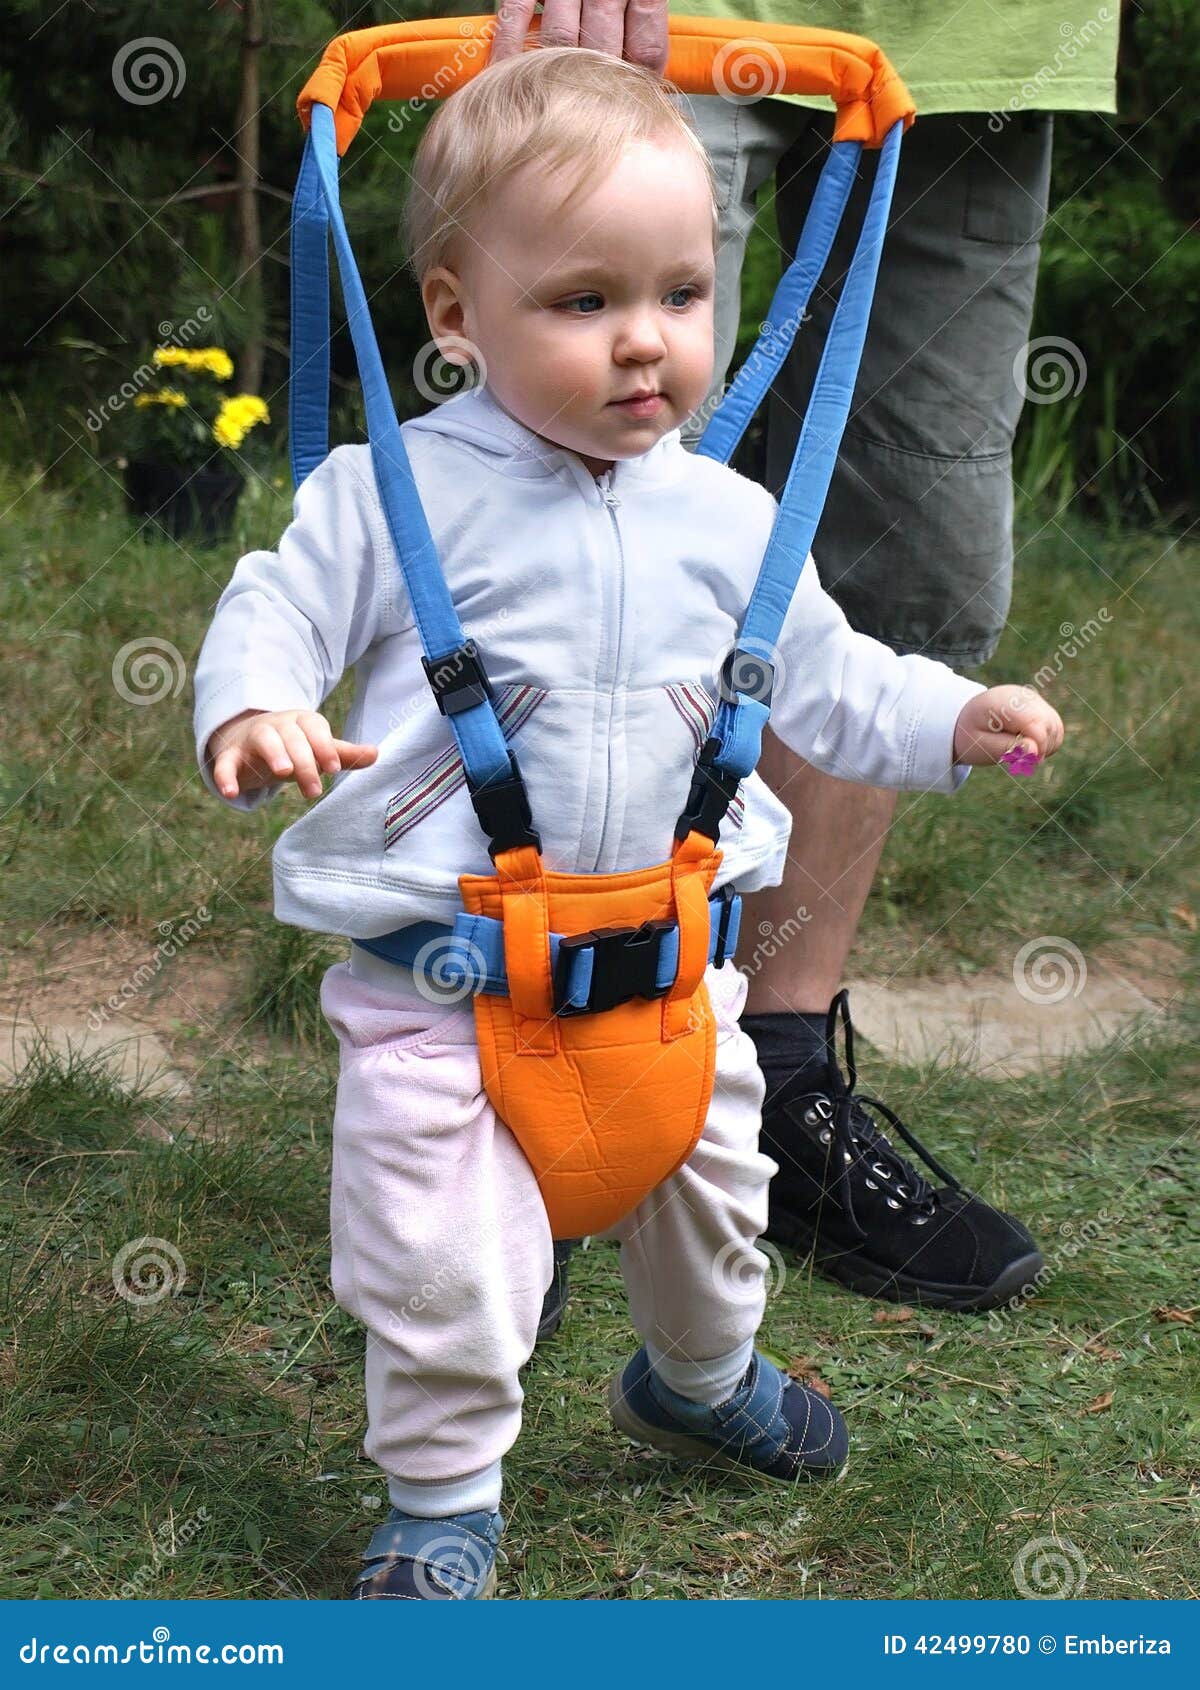 child safety harness for walking